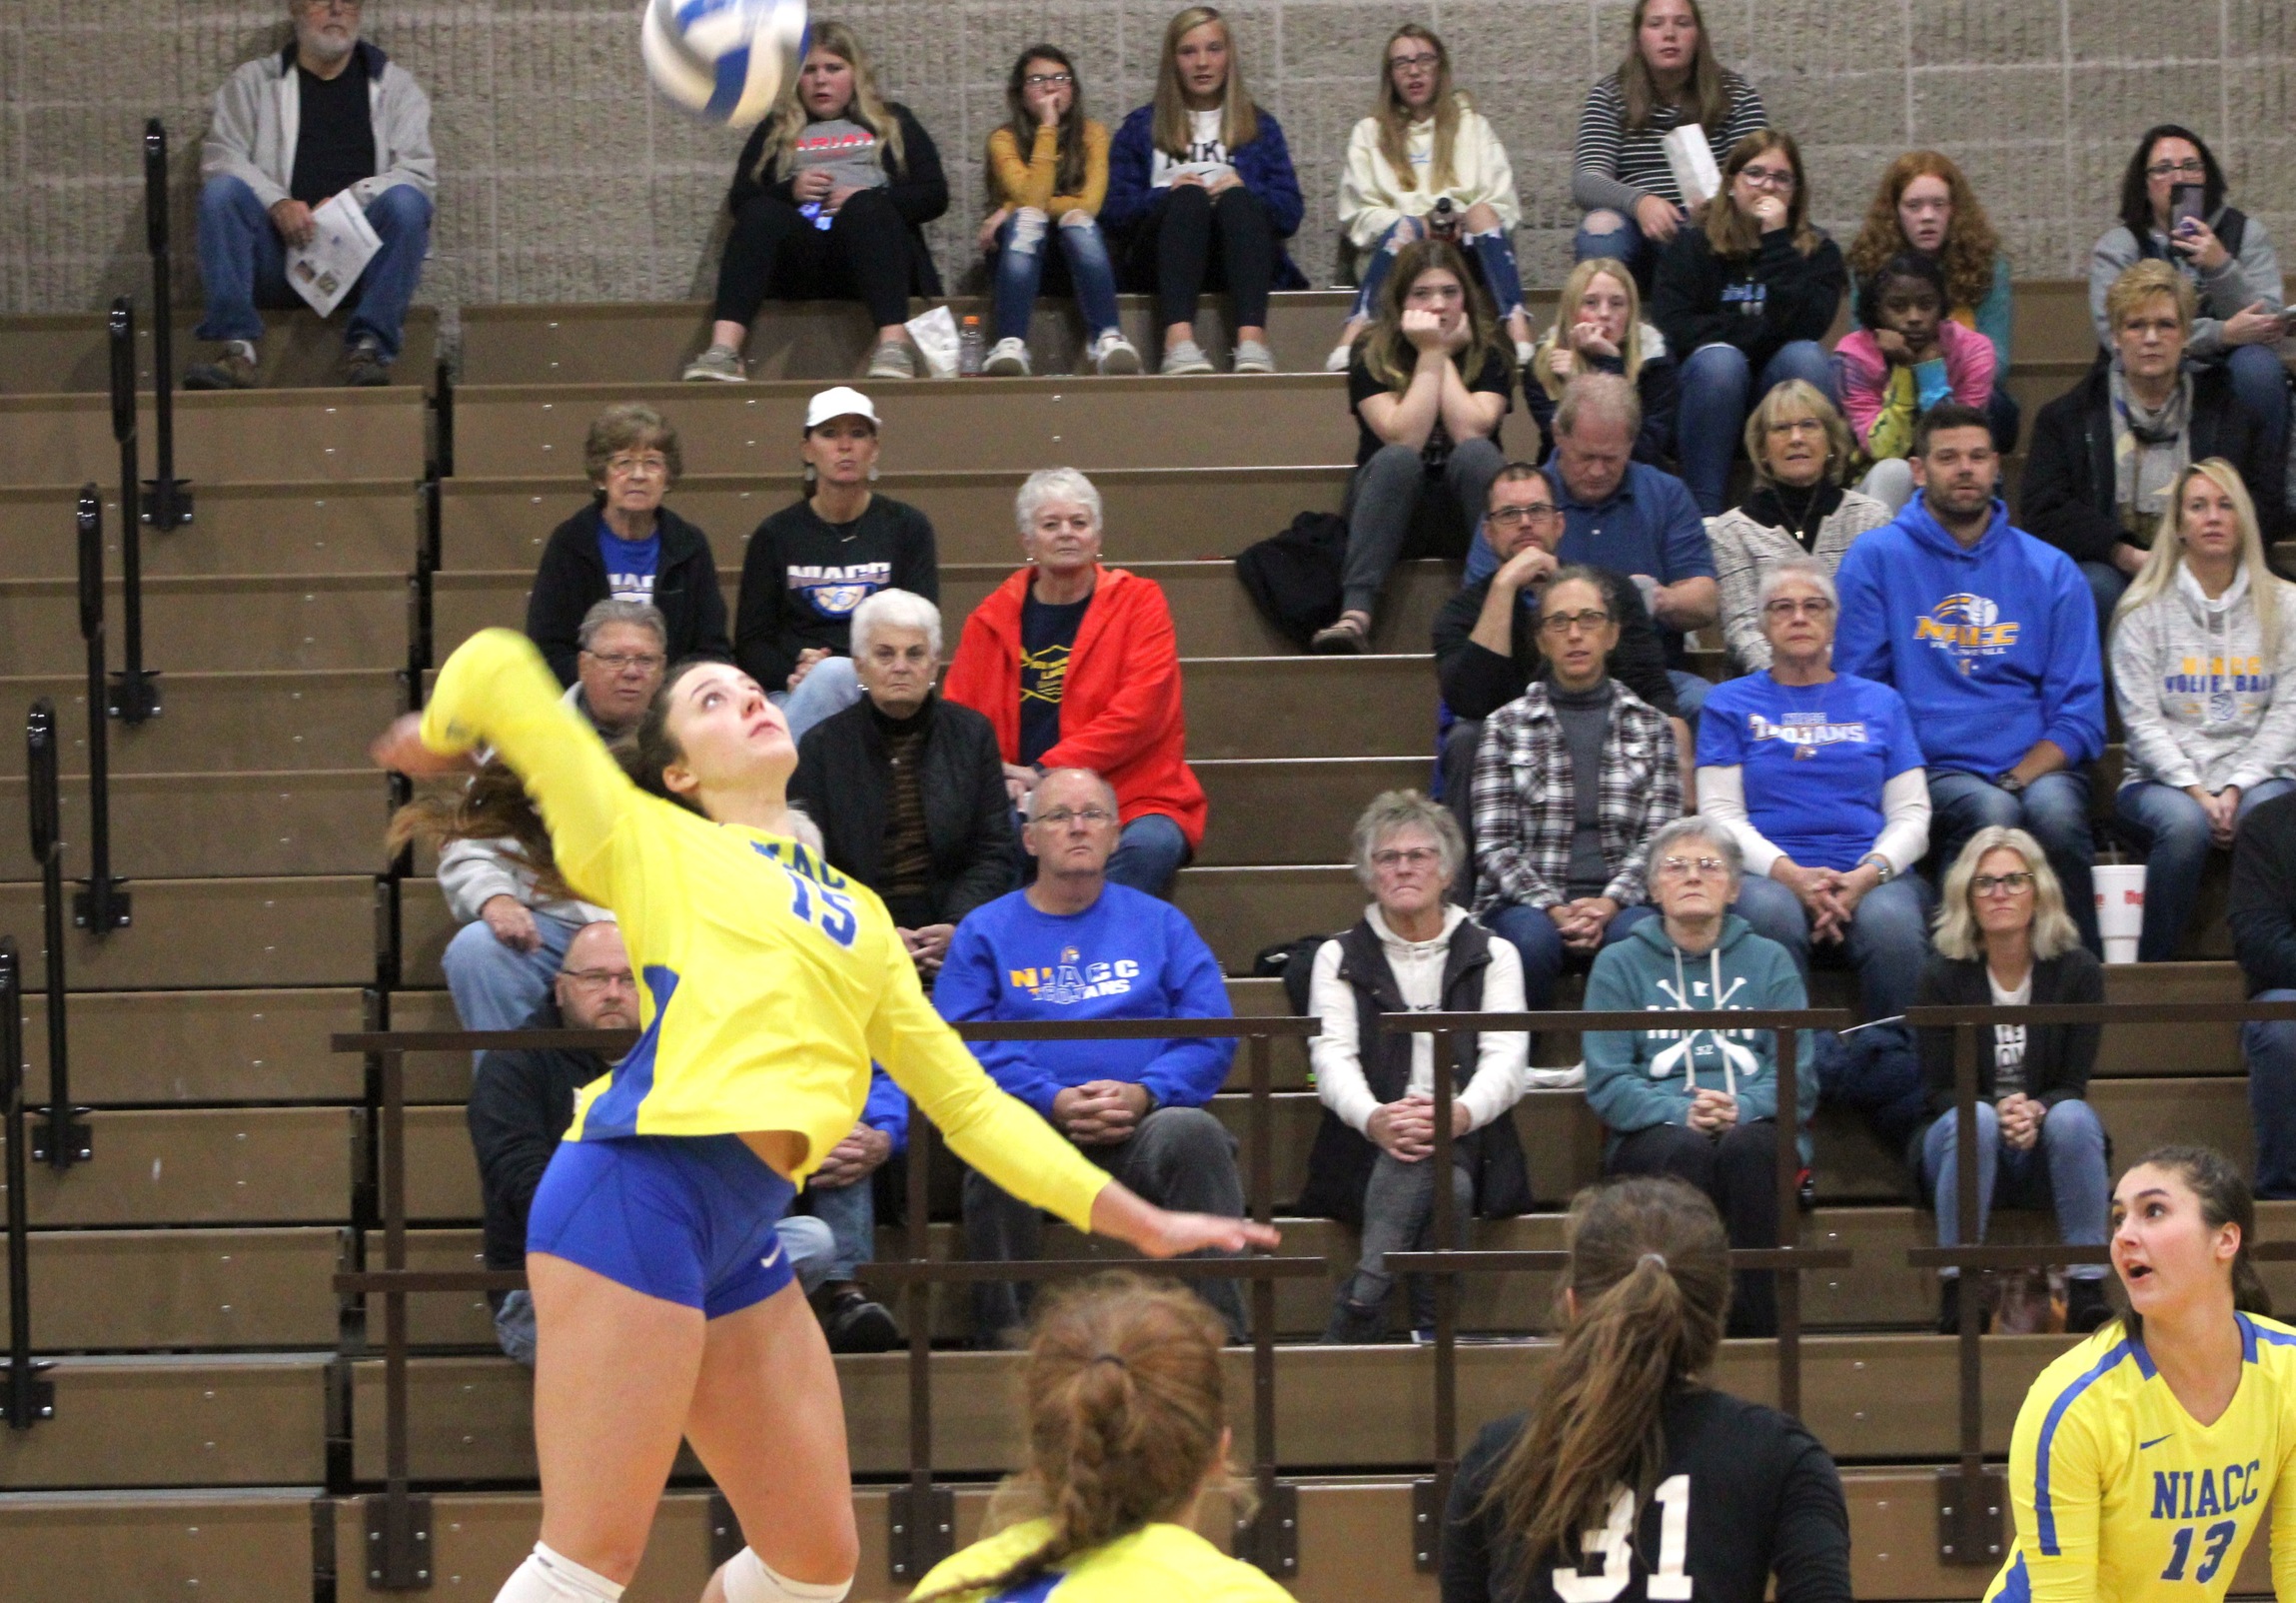 Grace Tobin led NIACC with 11 kills on Wednesday against Iowa Central.